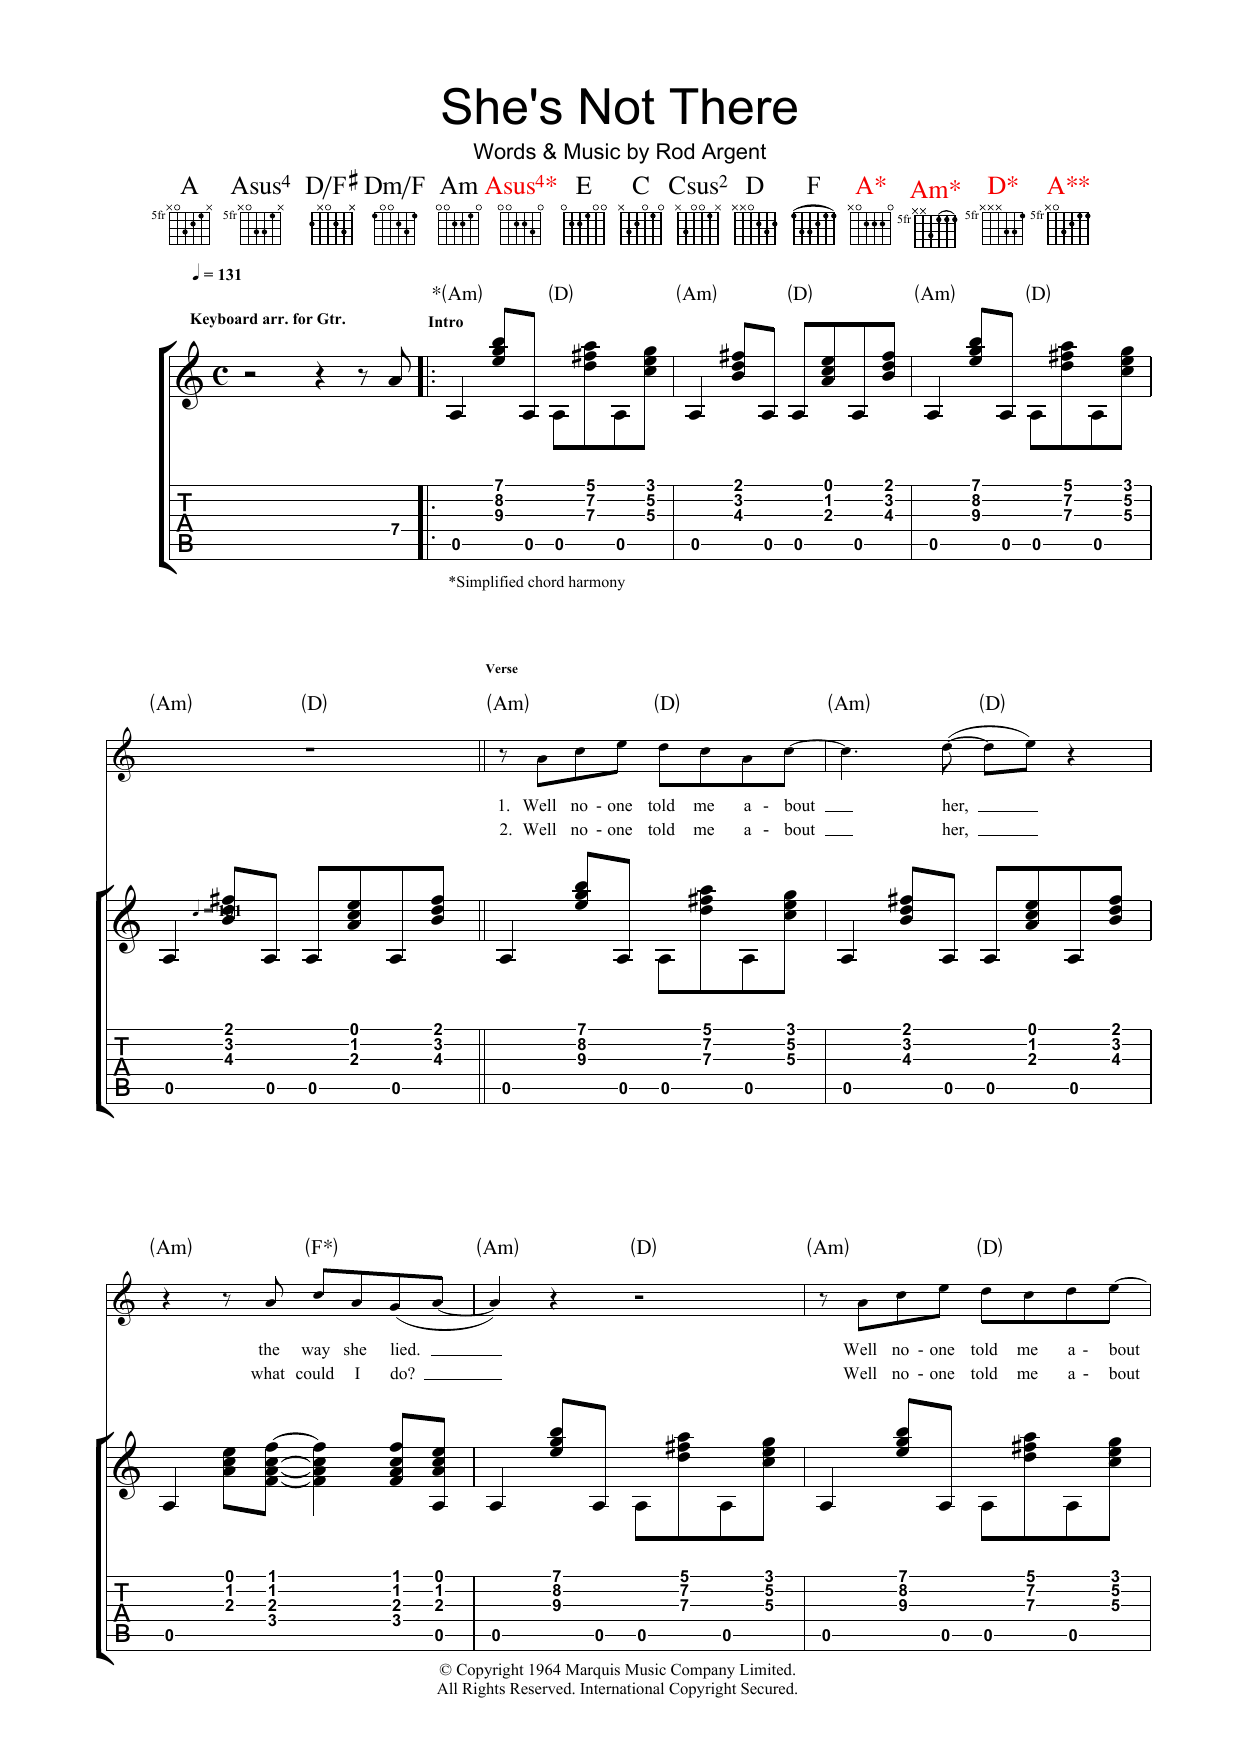 Download The Zombies She's Not There Sheet Music